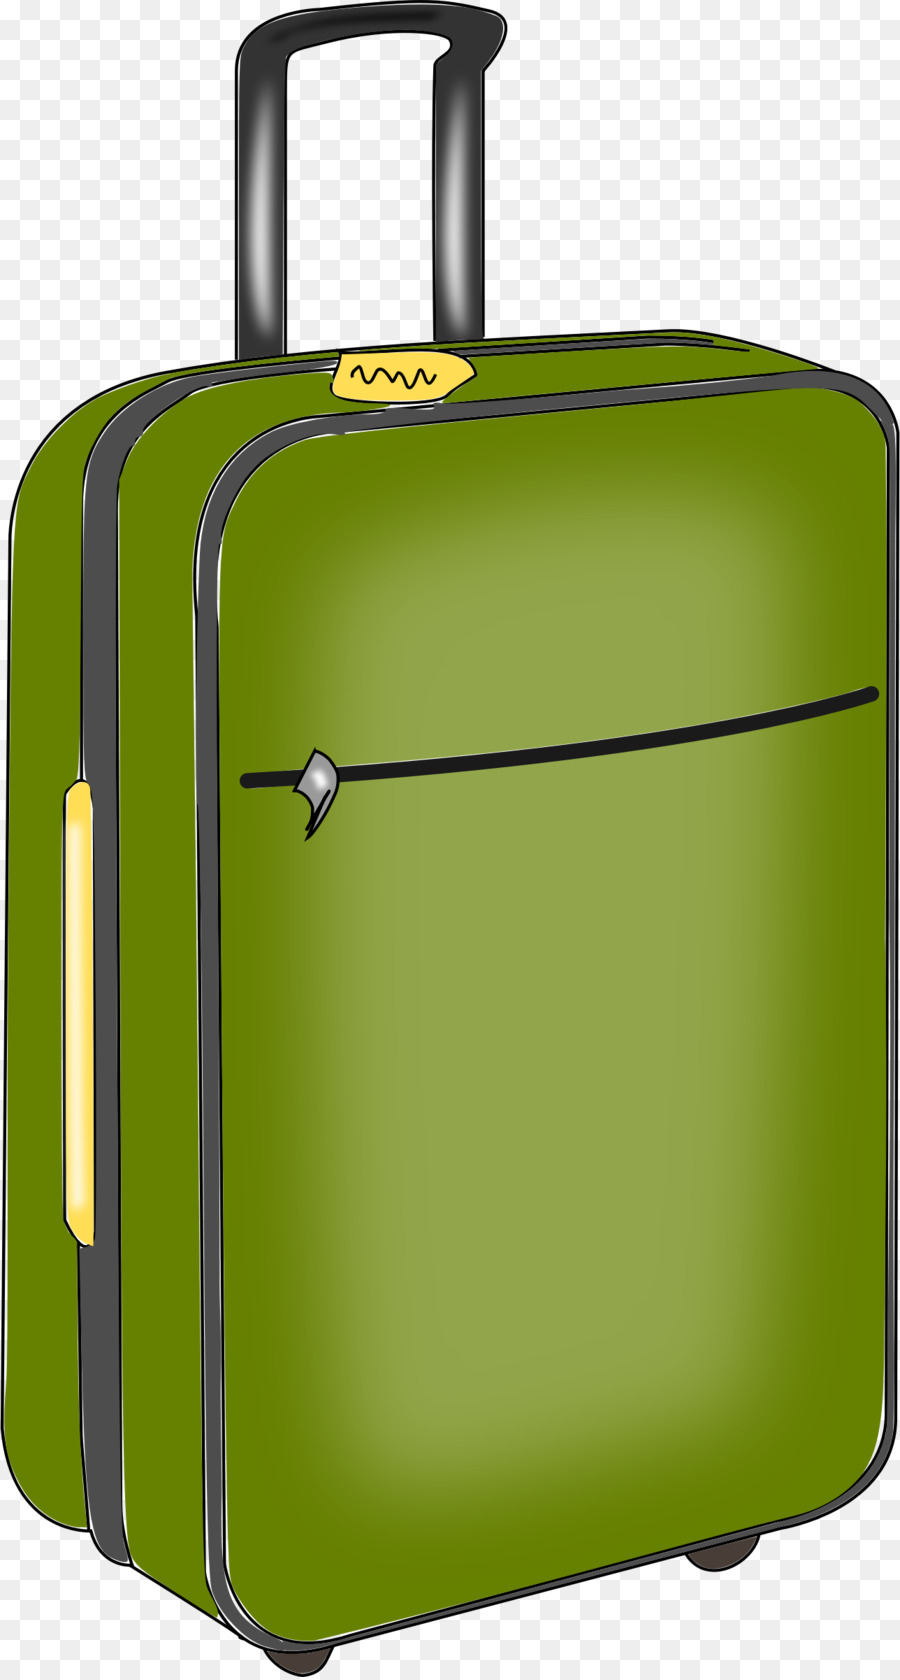 Suitcase Baggage Travel Clip art - luggage png download - 1288*2400 - Free Transparent Suitcase png Download.